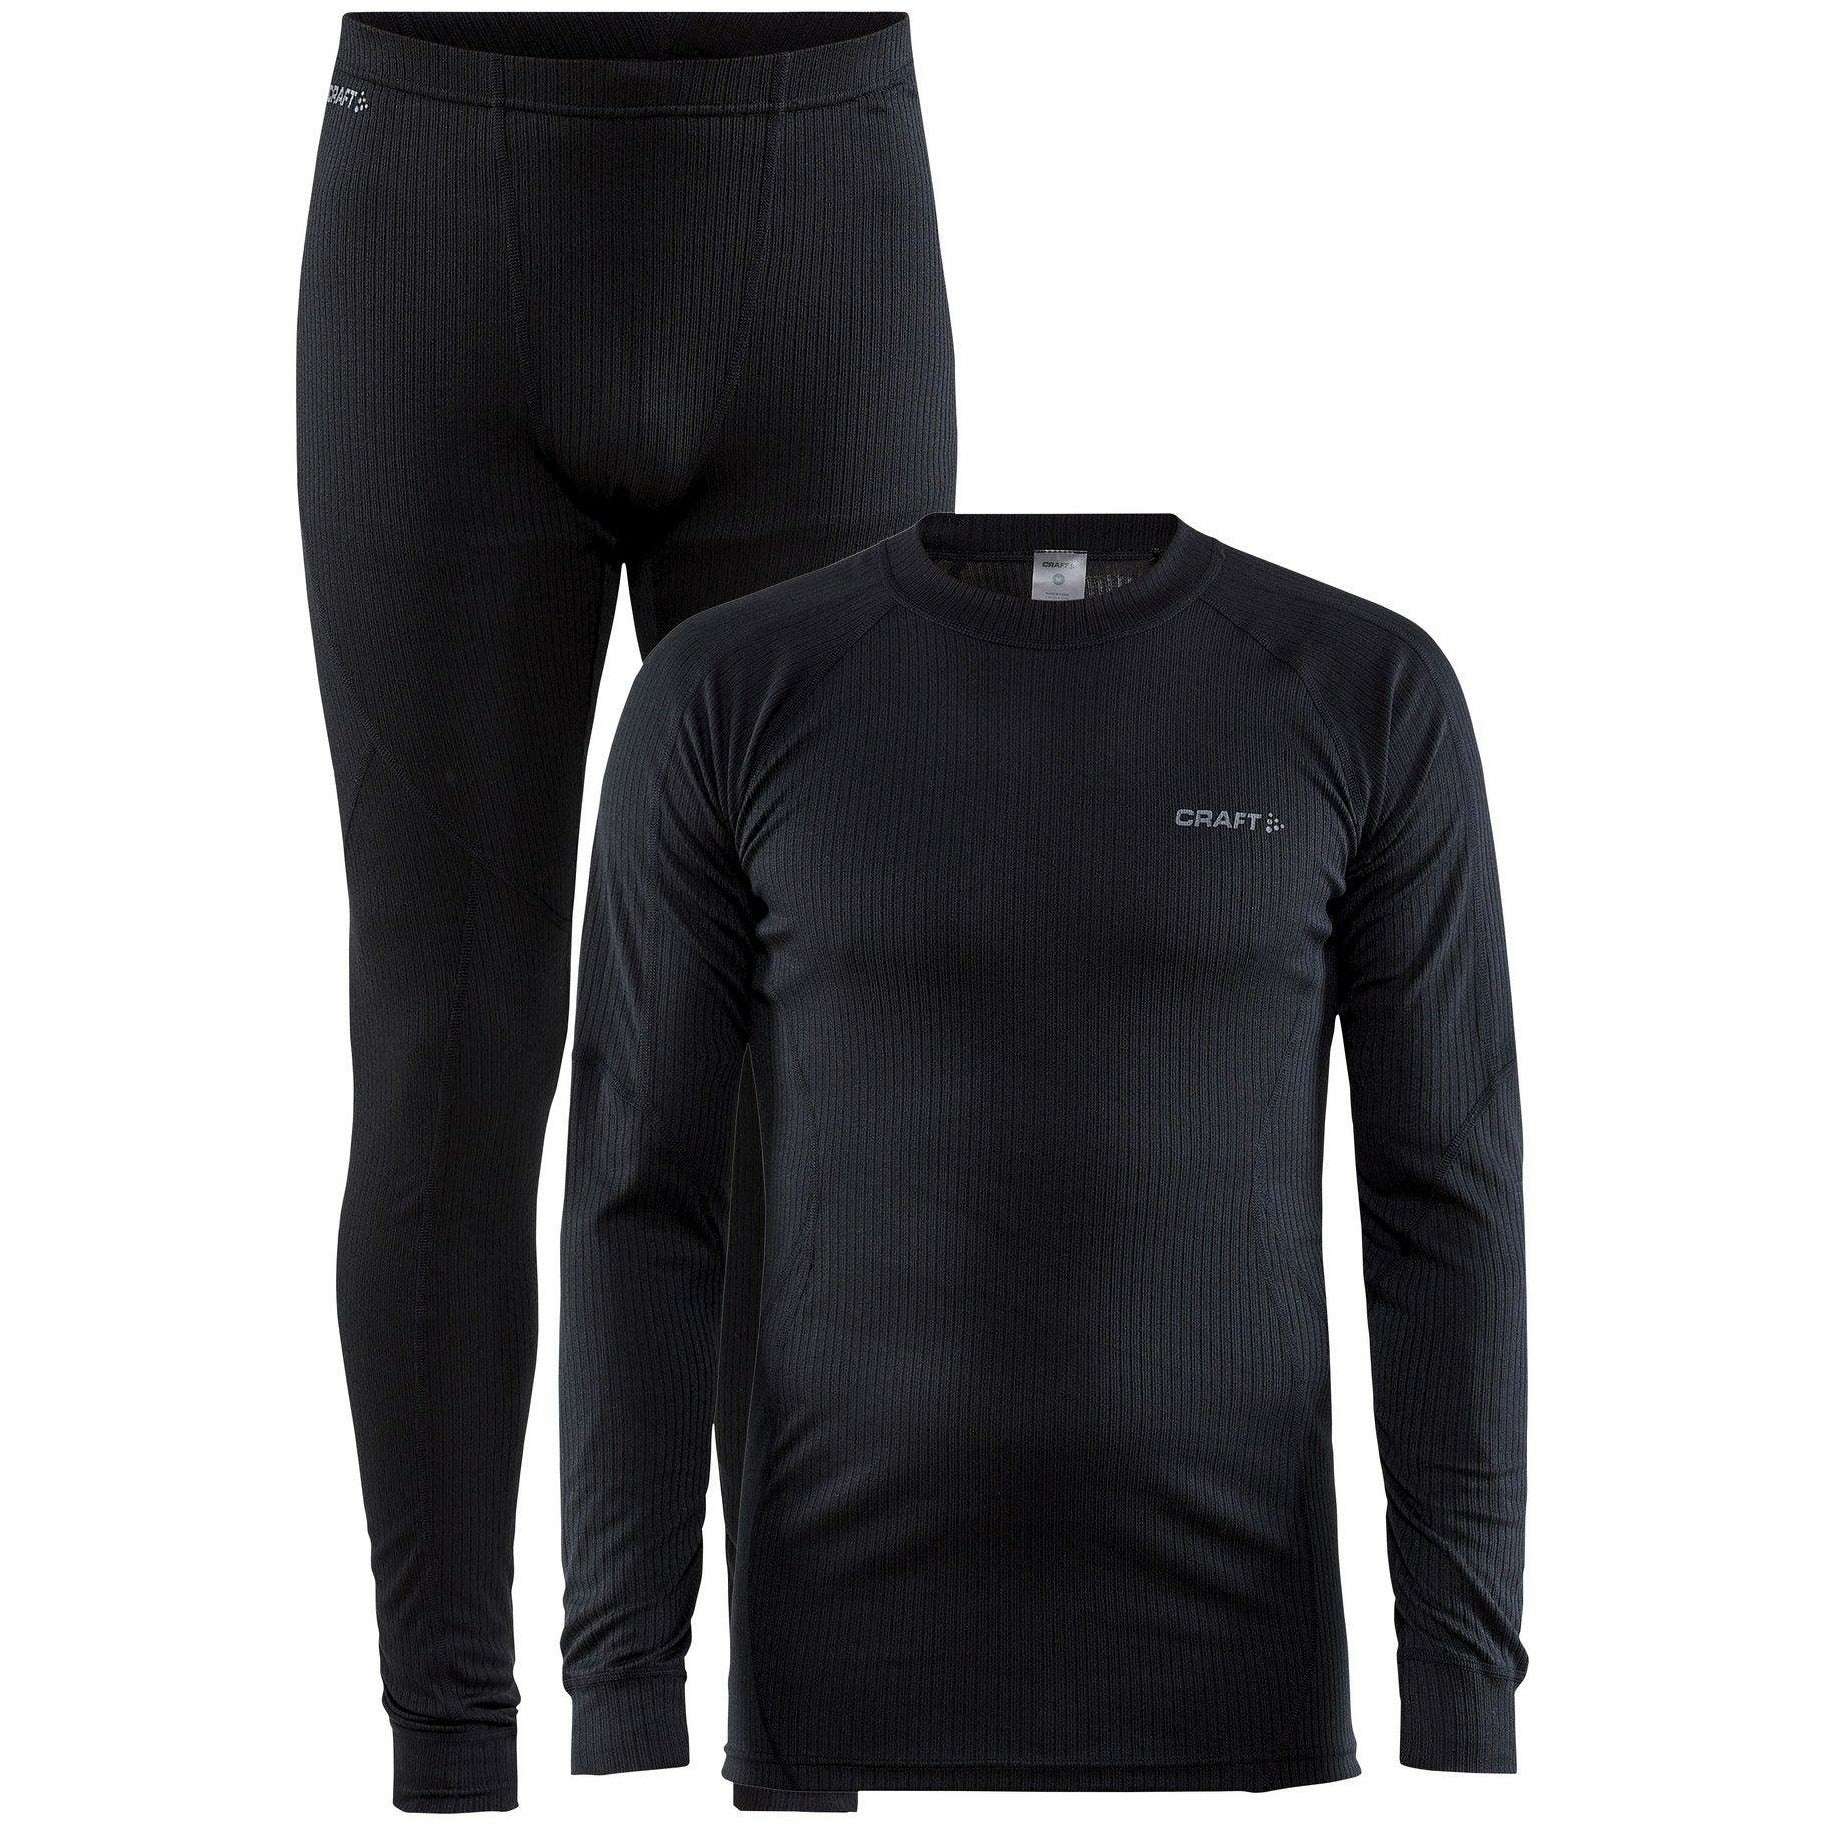 Craft Men's CORE Dry Baselayer Set - Pioneer Midwest